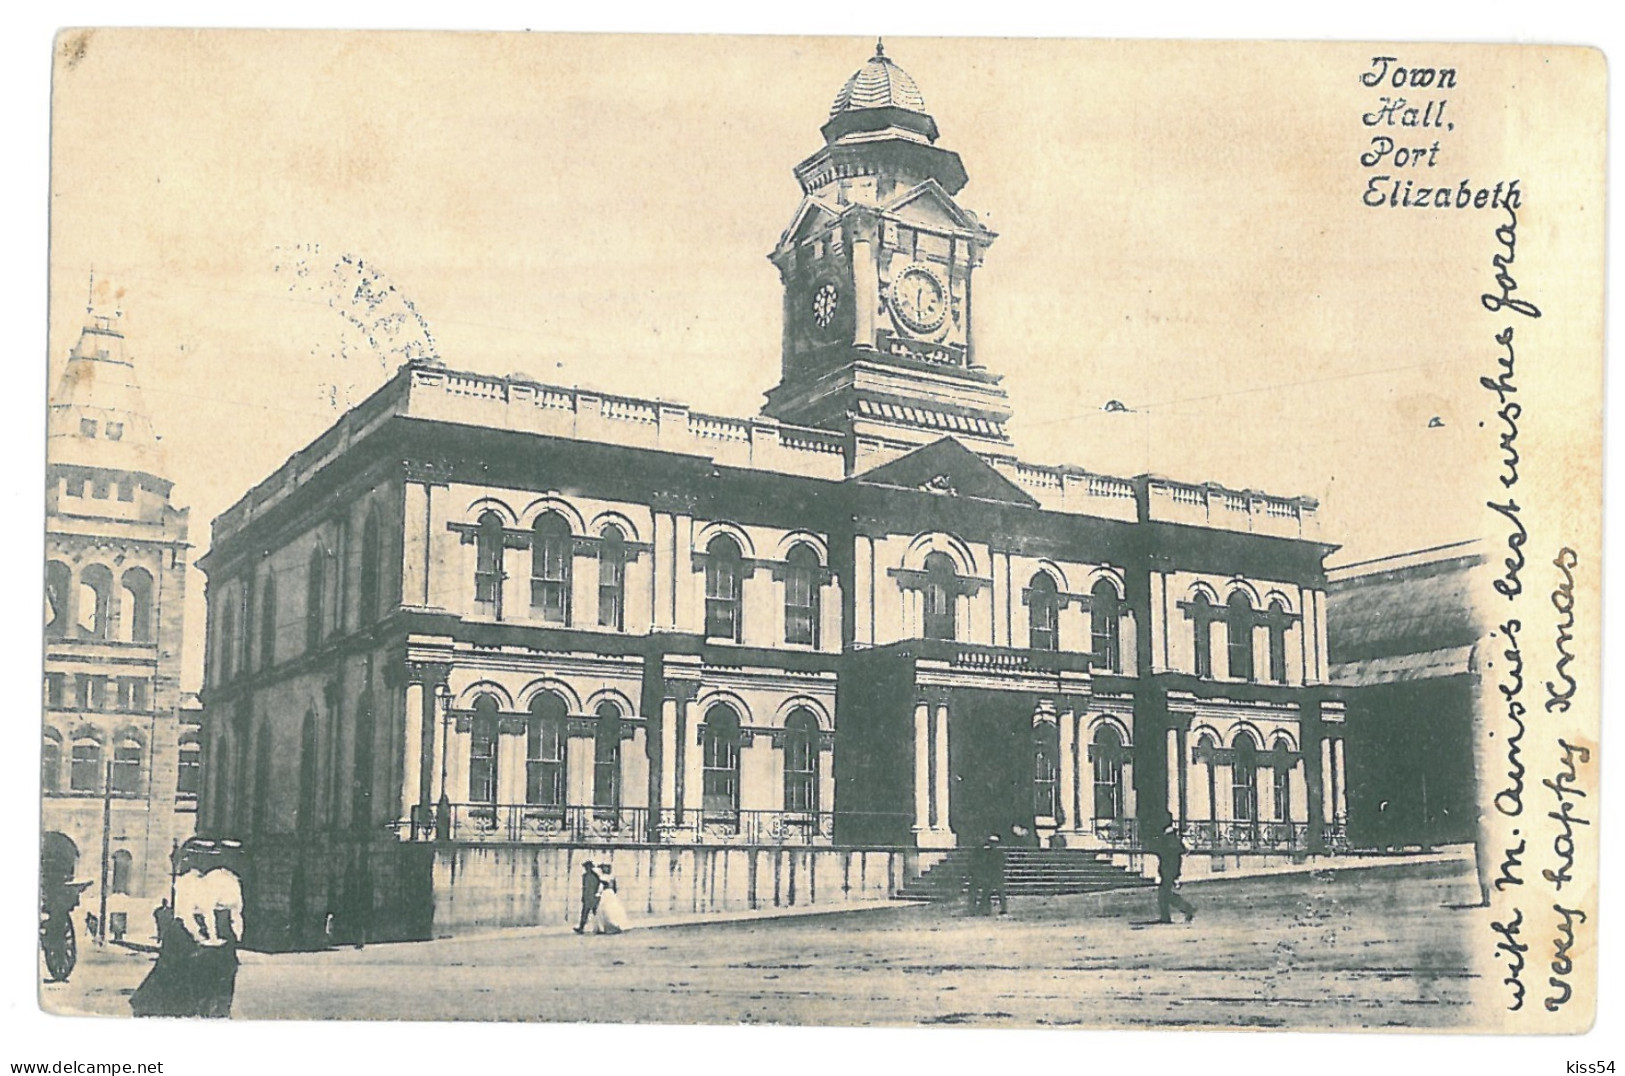 A 100 - 12078 PORT ELIZABETH, Town Hall - Old Postcard - Used - 1906 - South Africa